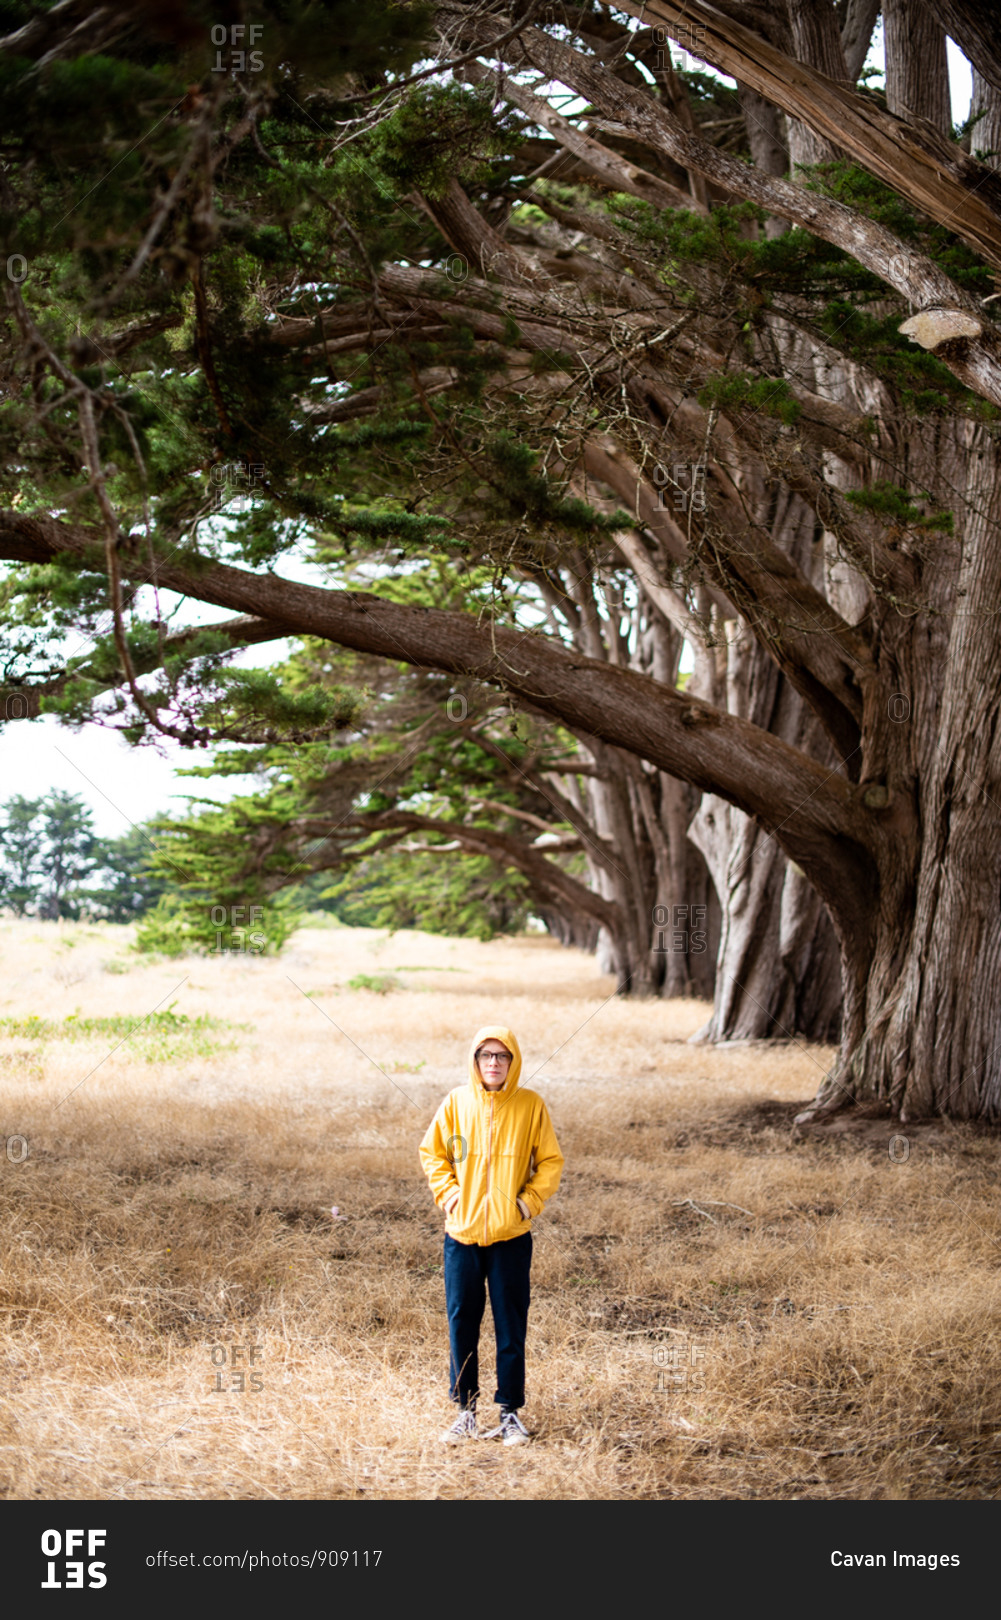 Tween standing in grass next to line of Cypress trees in Point Reyes